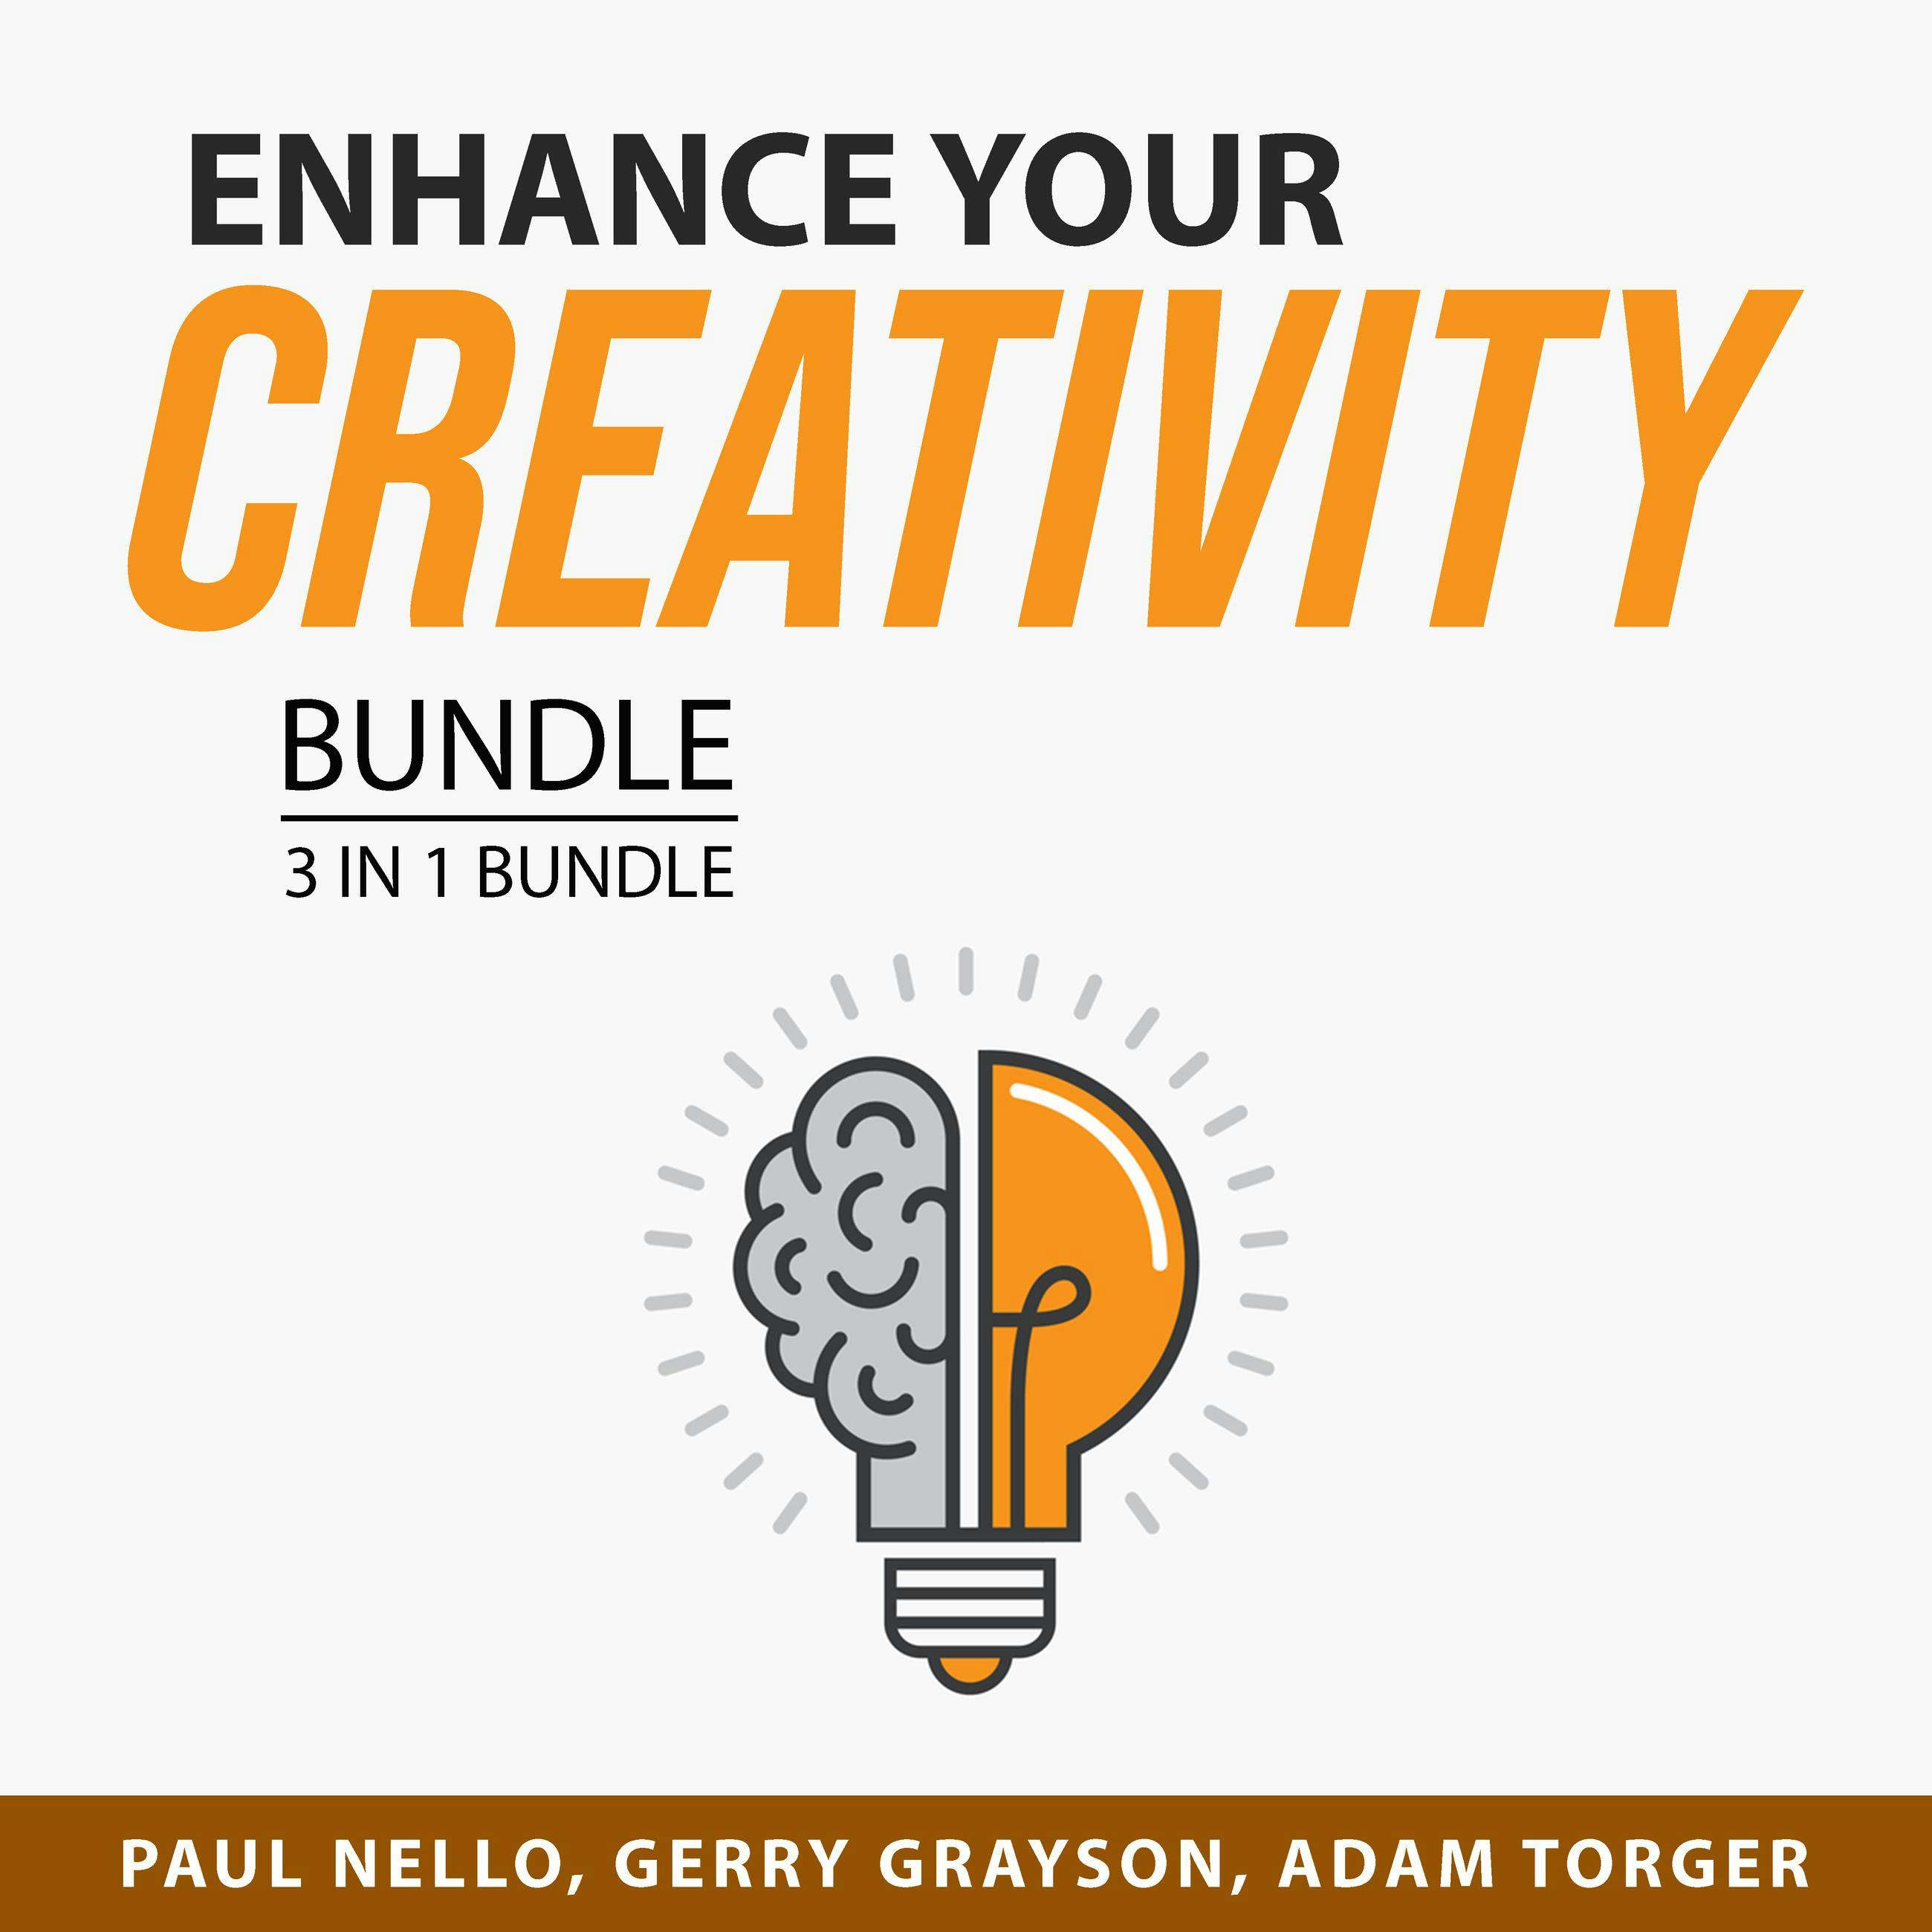 Enhance Your Creativity Bundle, 3 in 1 Bundle: Creative Thinking, Creative You, and Product Creation Blueprint - Paul Nello, Adam Torger, Gerry Grayson